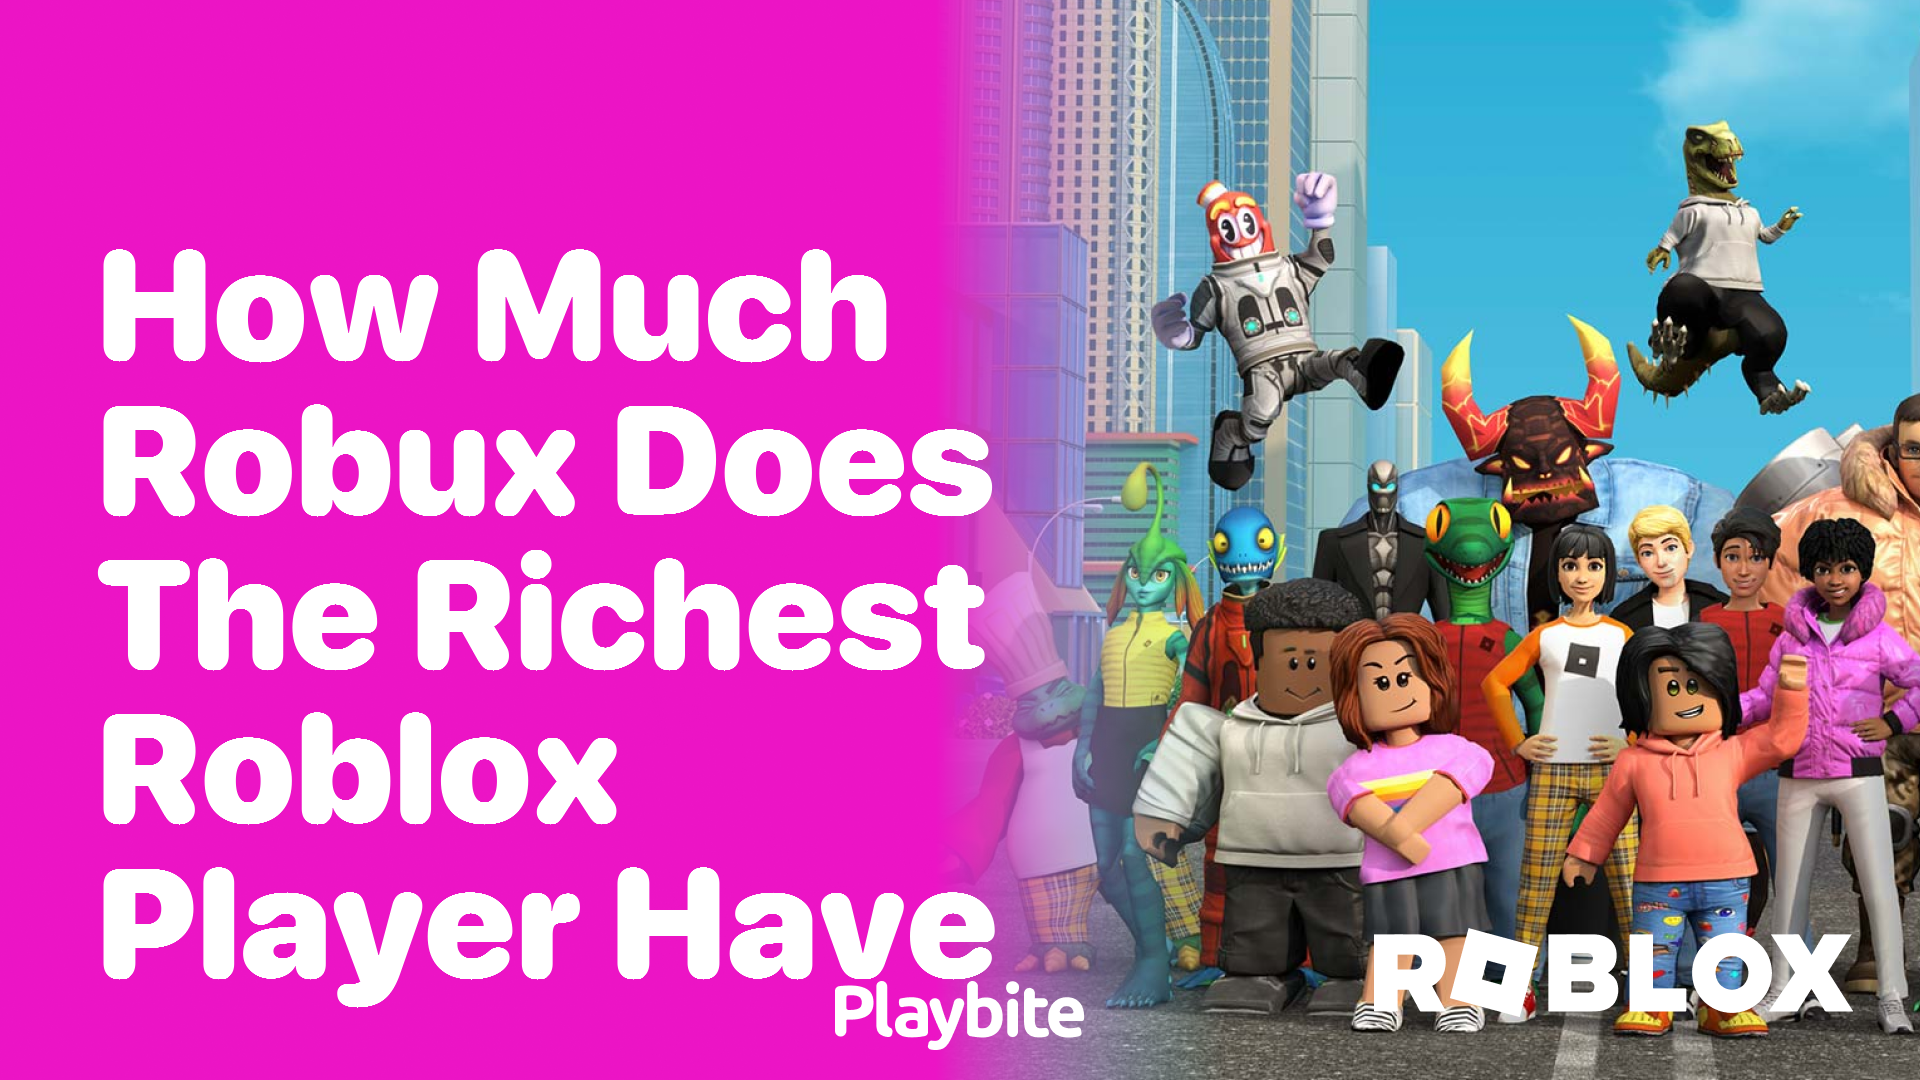 How Much Robux Does the Richest Roblox Player Have?